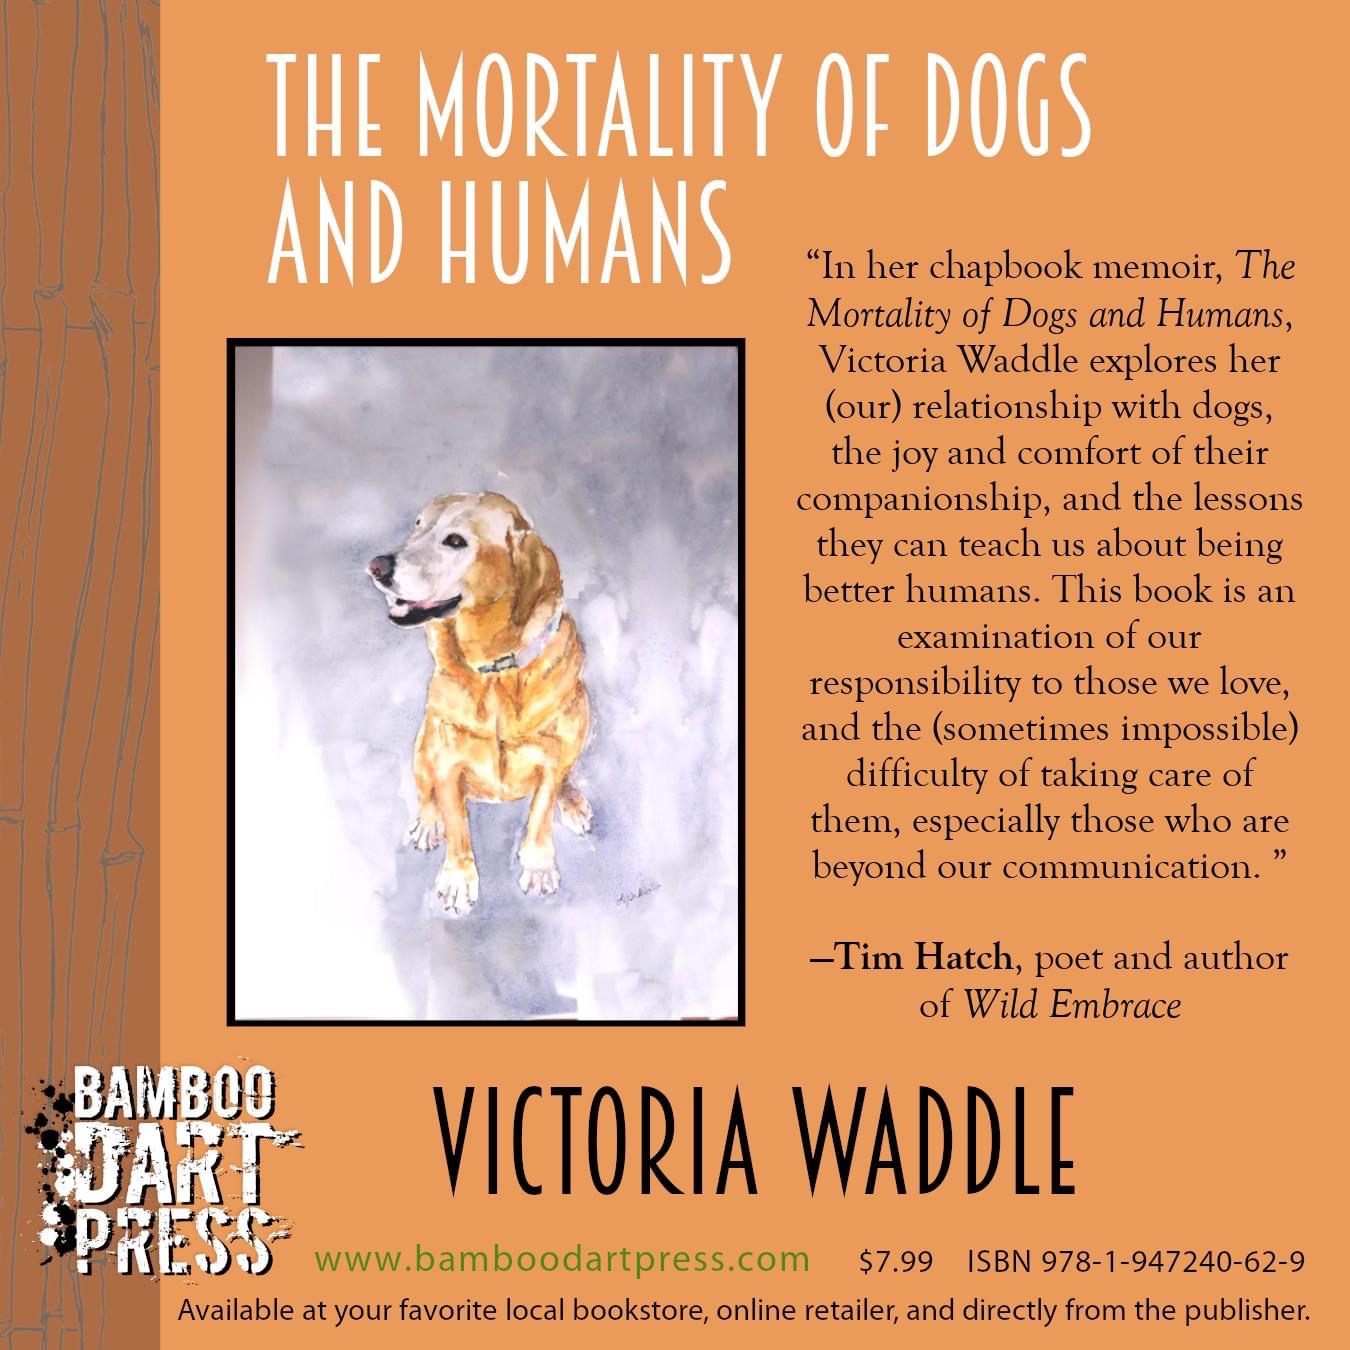 Cover images from my chapbook "The Mortality of Dogs and Humans."